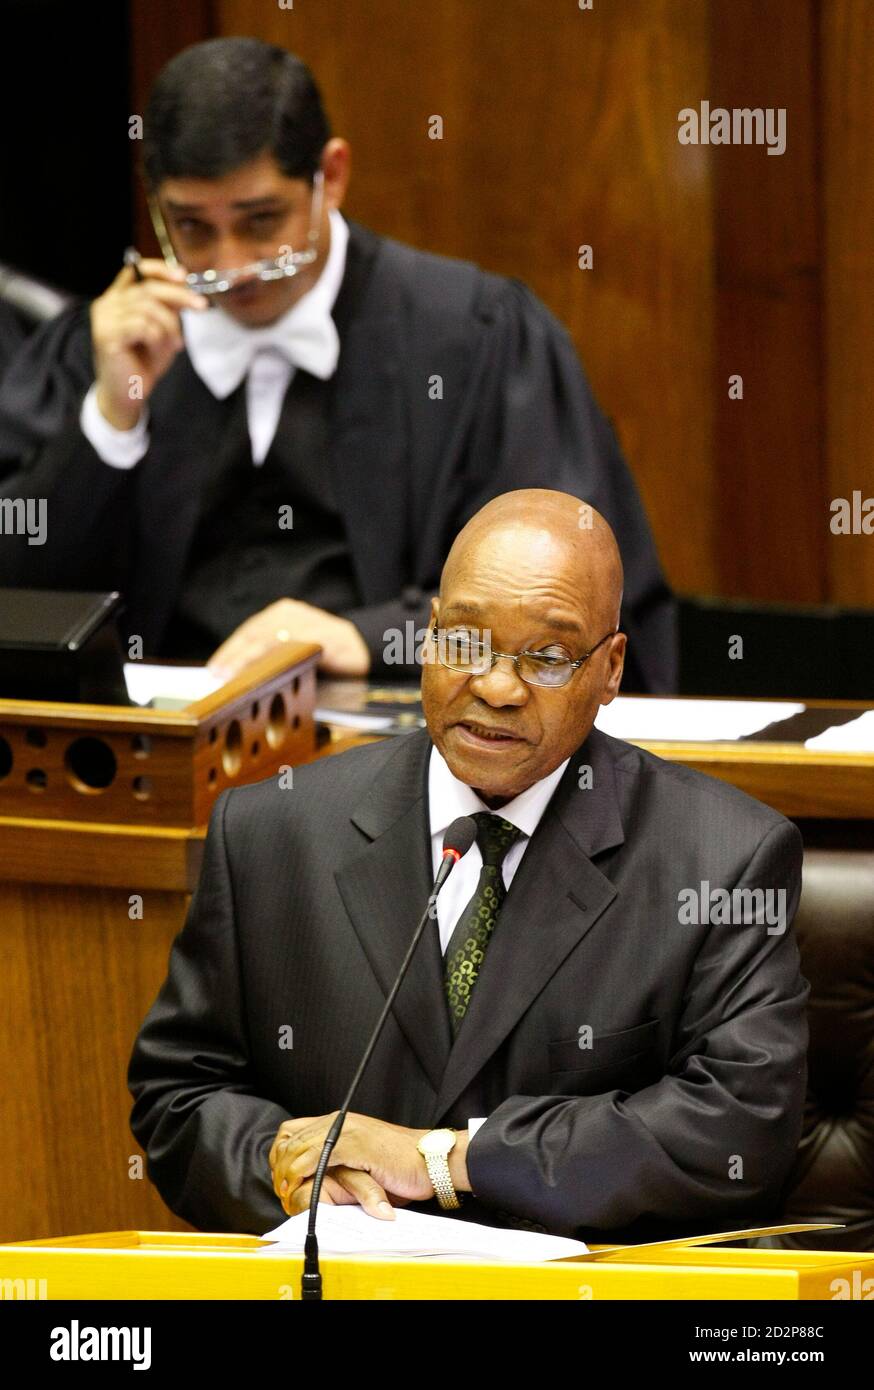 South African President Jacob Zuma delivers his State of The Nation address in Parliament,  June 3, 2009. South Africa must act now to minimise the impact of the global financial crisis on the poor, but still has to spend wisely, Zuma said on Wednesday in his first major speech as the country's leader.  REUTERS/Mike Hutchings (SOUTH AFRICA POLITICS) Stock Photo